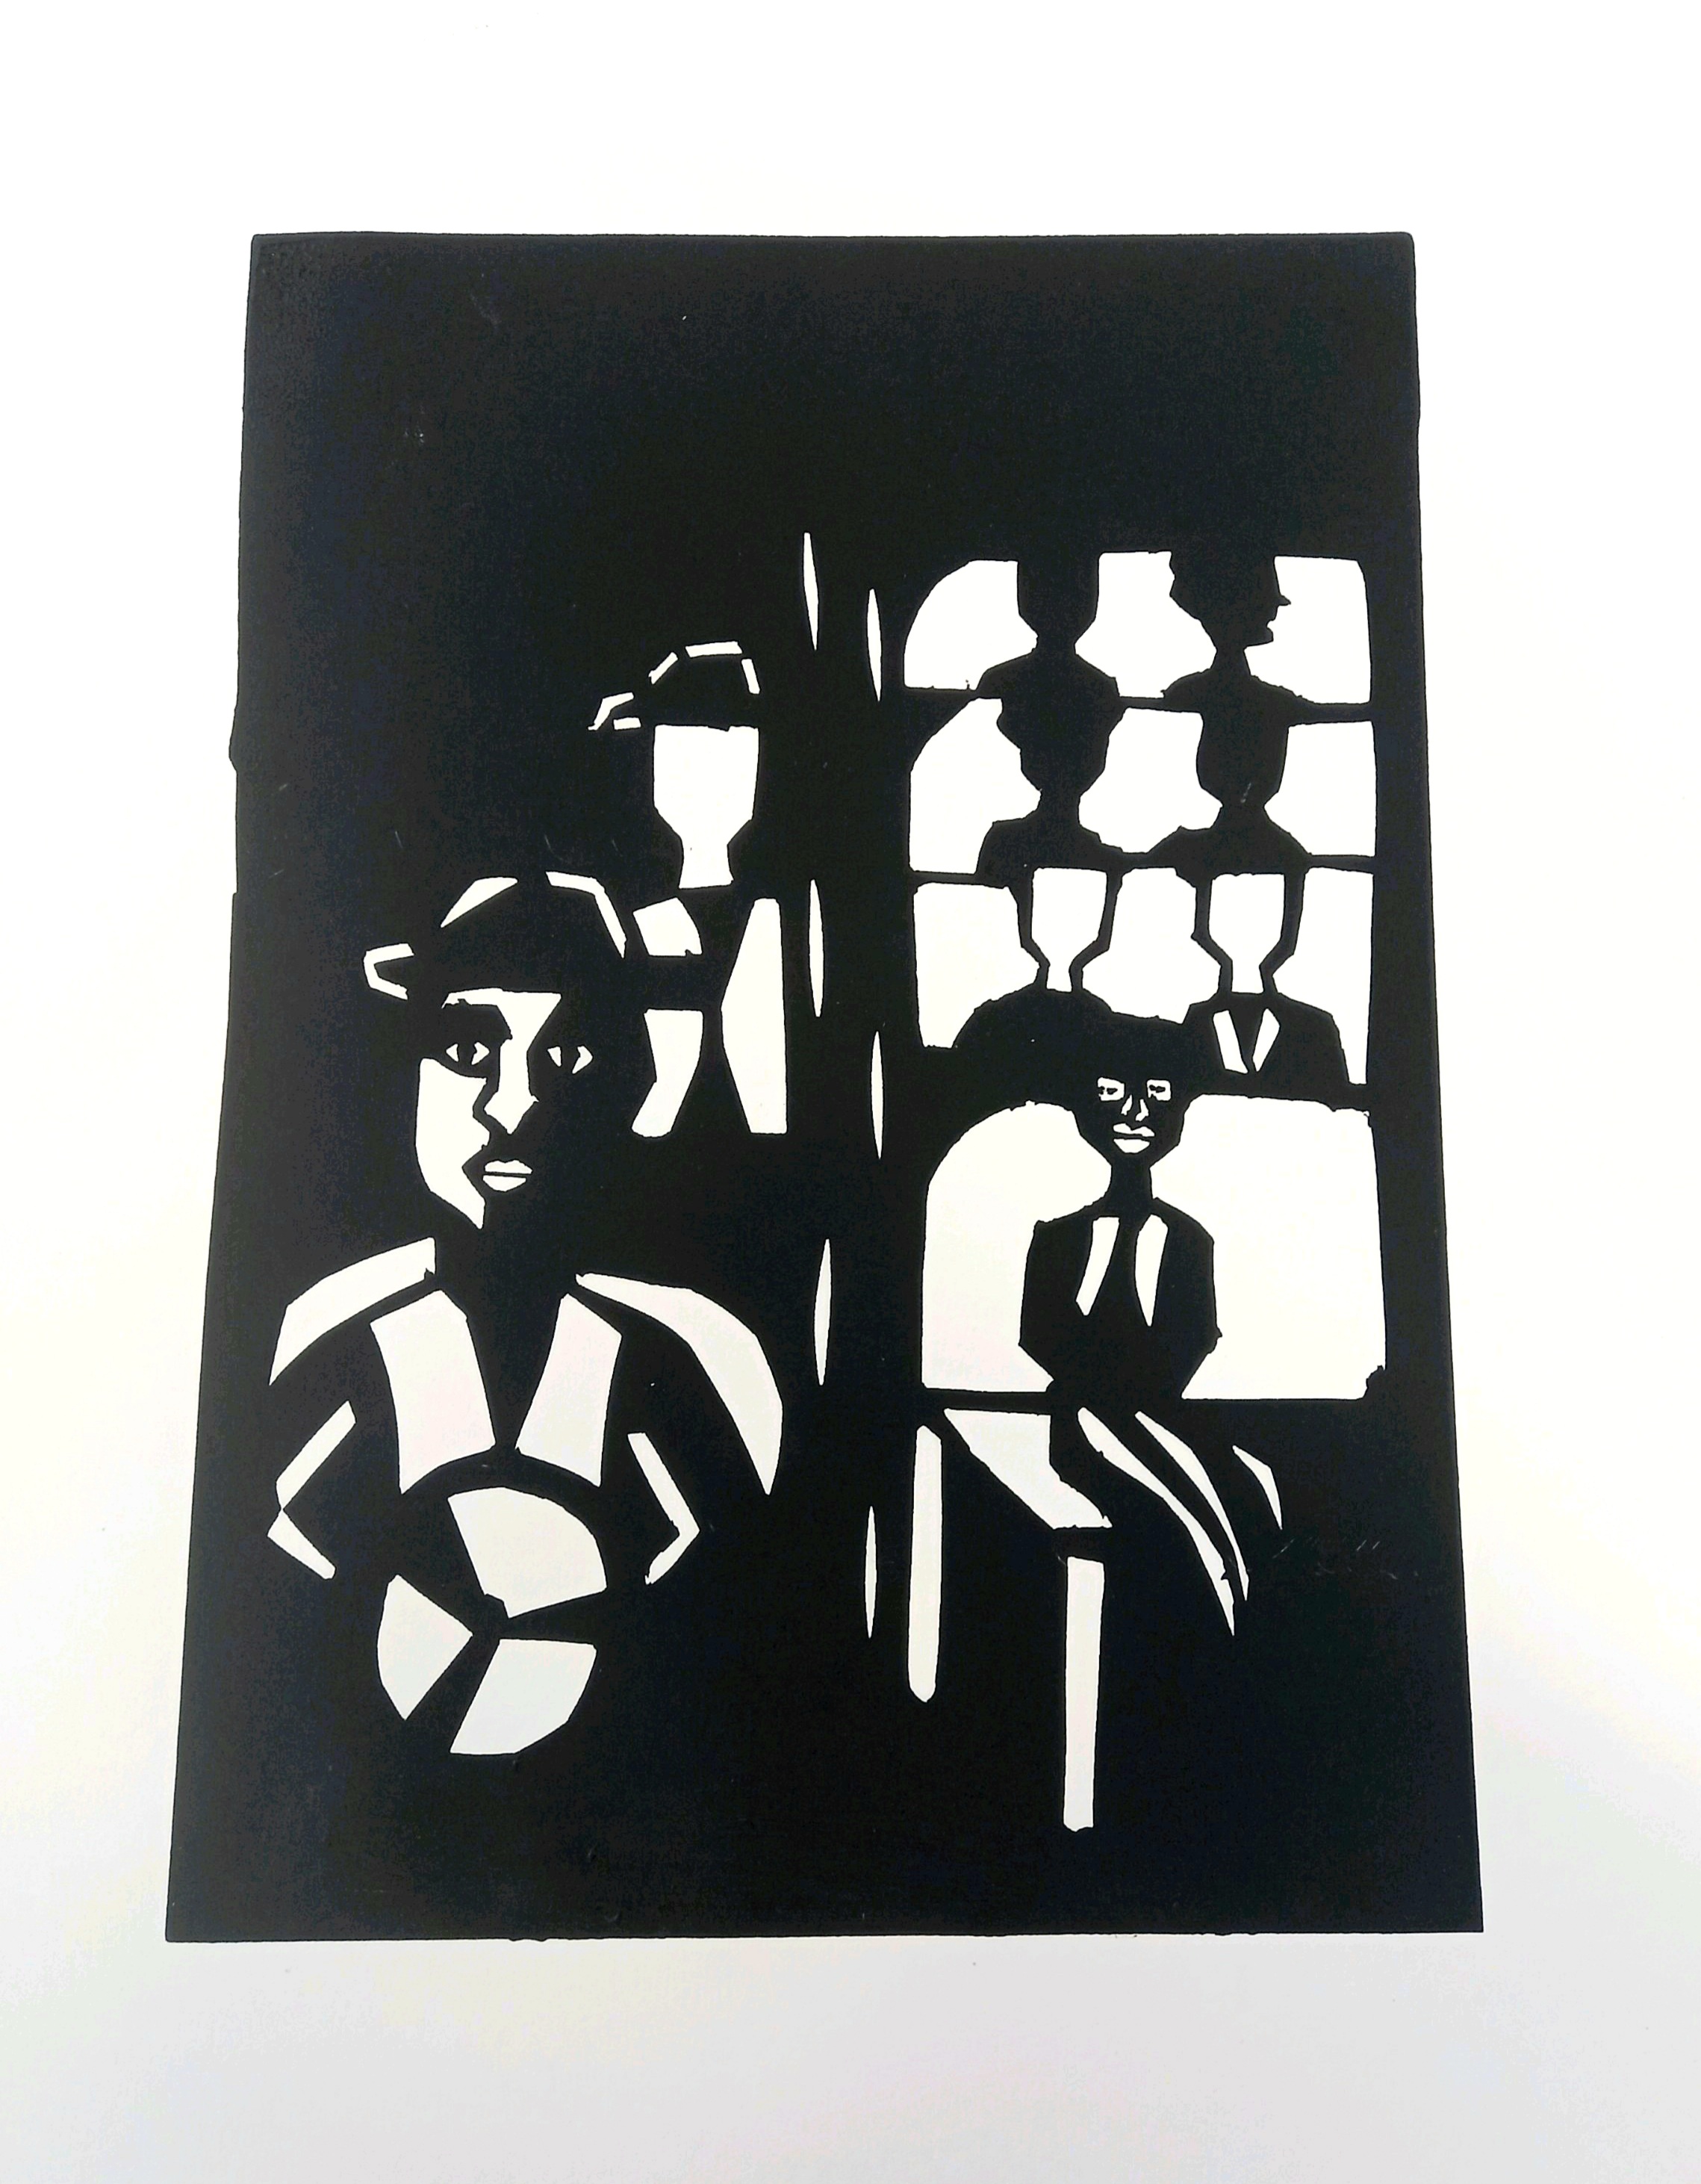 Racial segregation screenprint, exploring how history shaped racial equality in today's society.